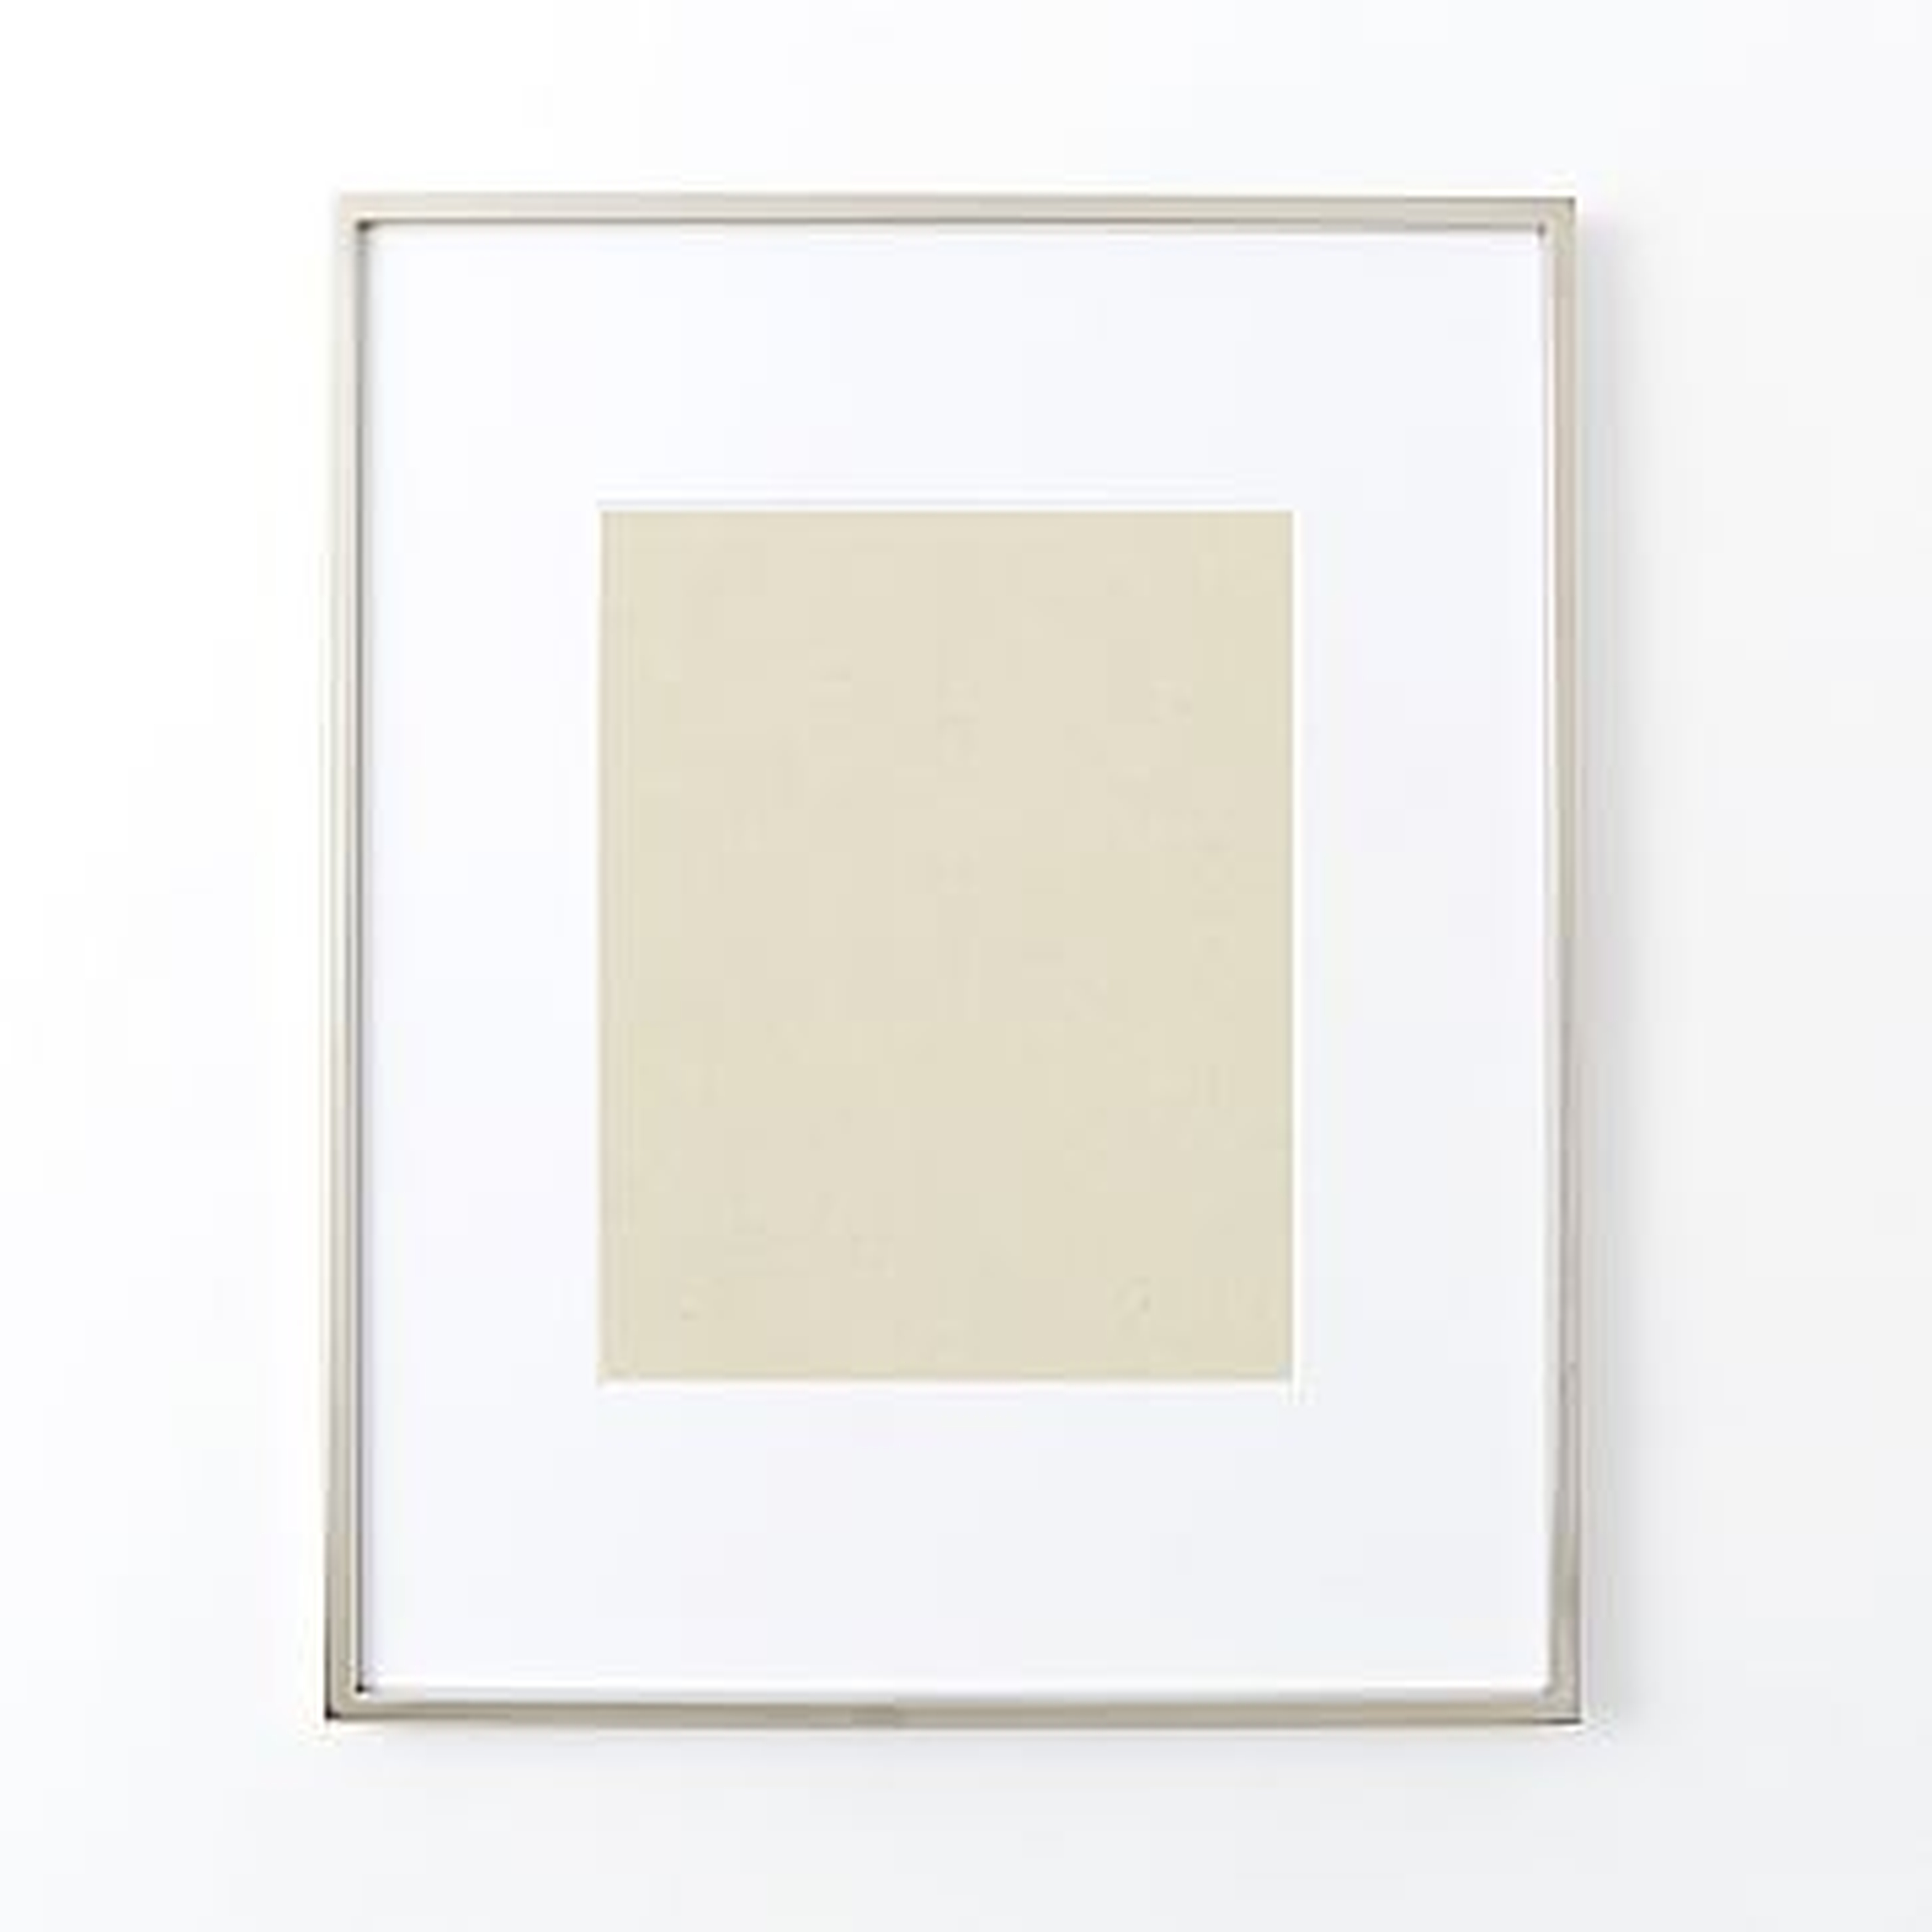 Gallery Frame, Polished Nickel, 8" x 10" (13" x 16" without mat) - West Elm